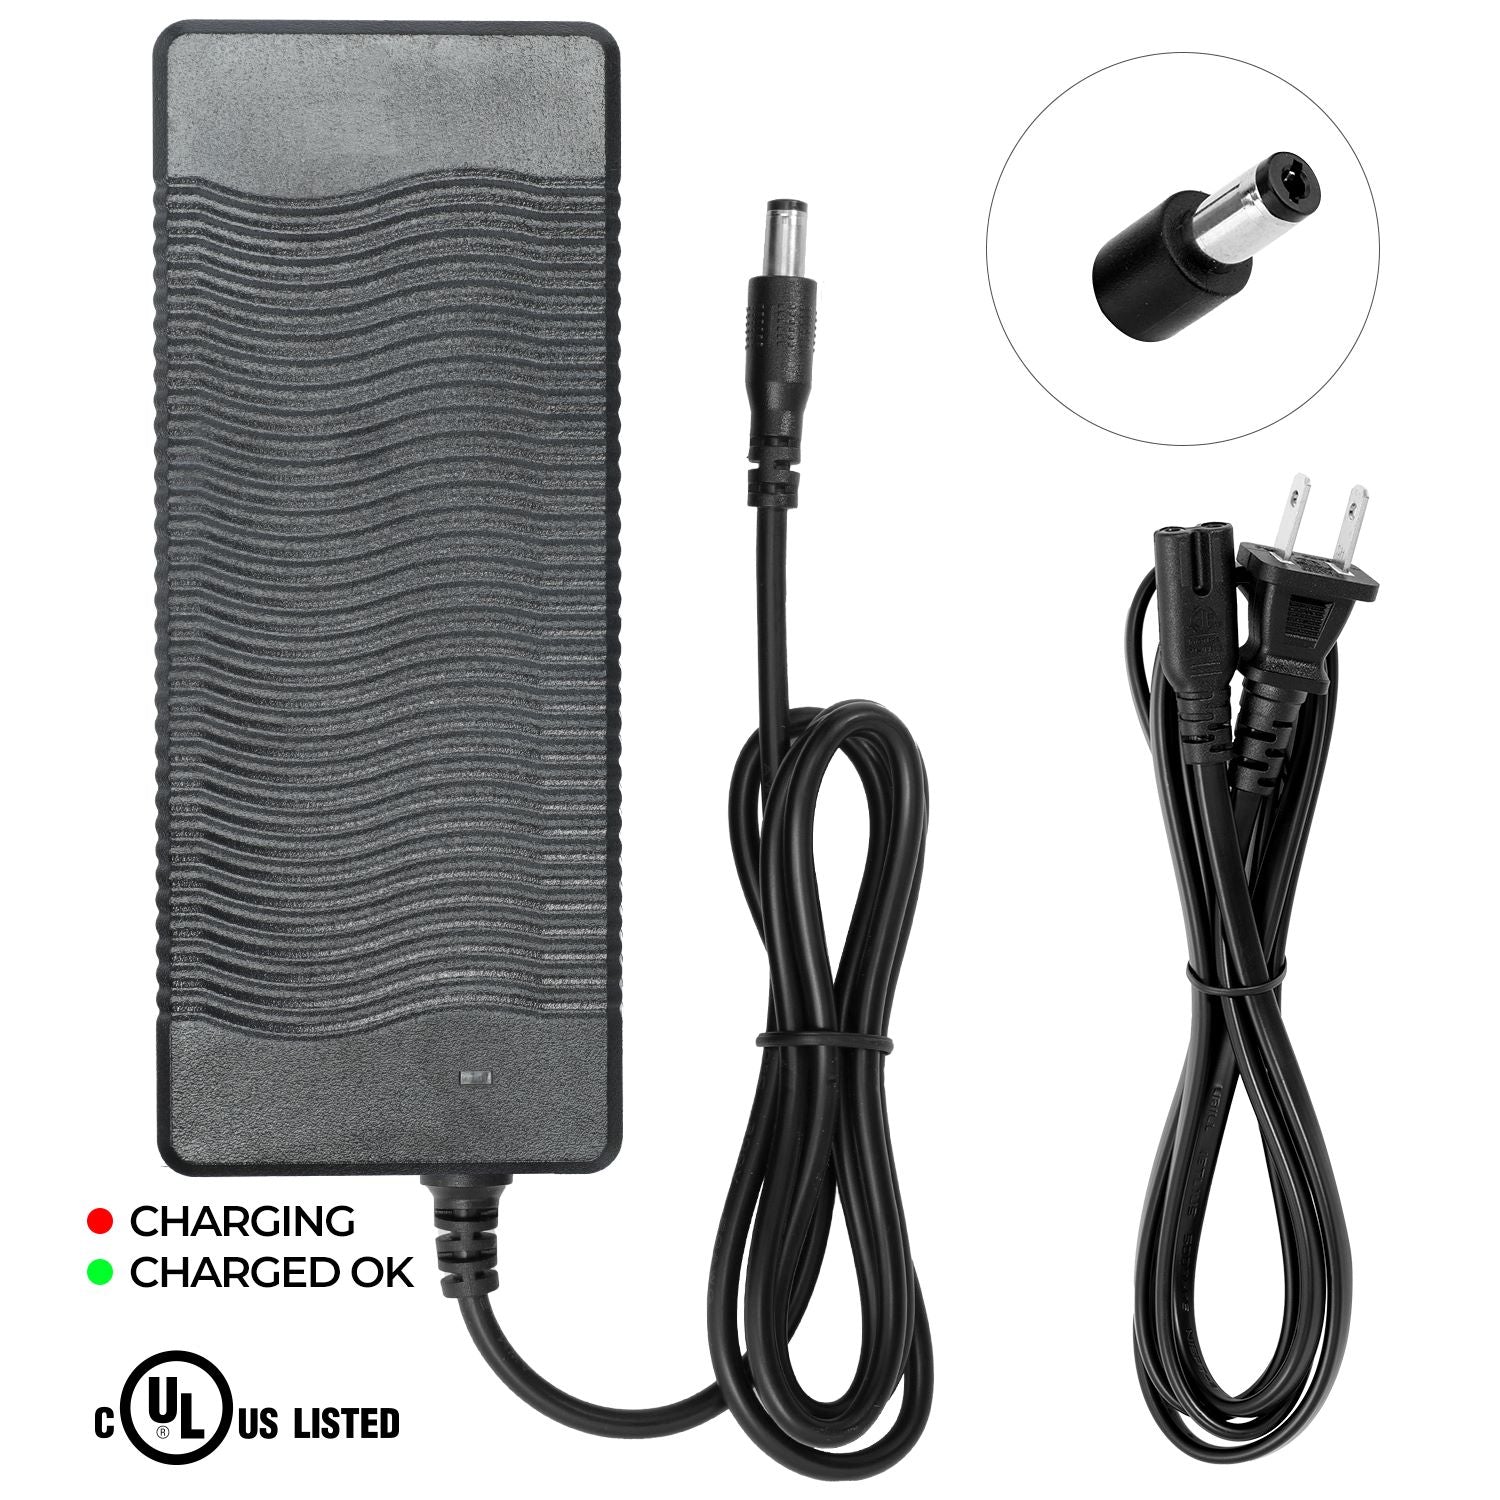 Charger for Rad Power RadExpand 5 eBike